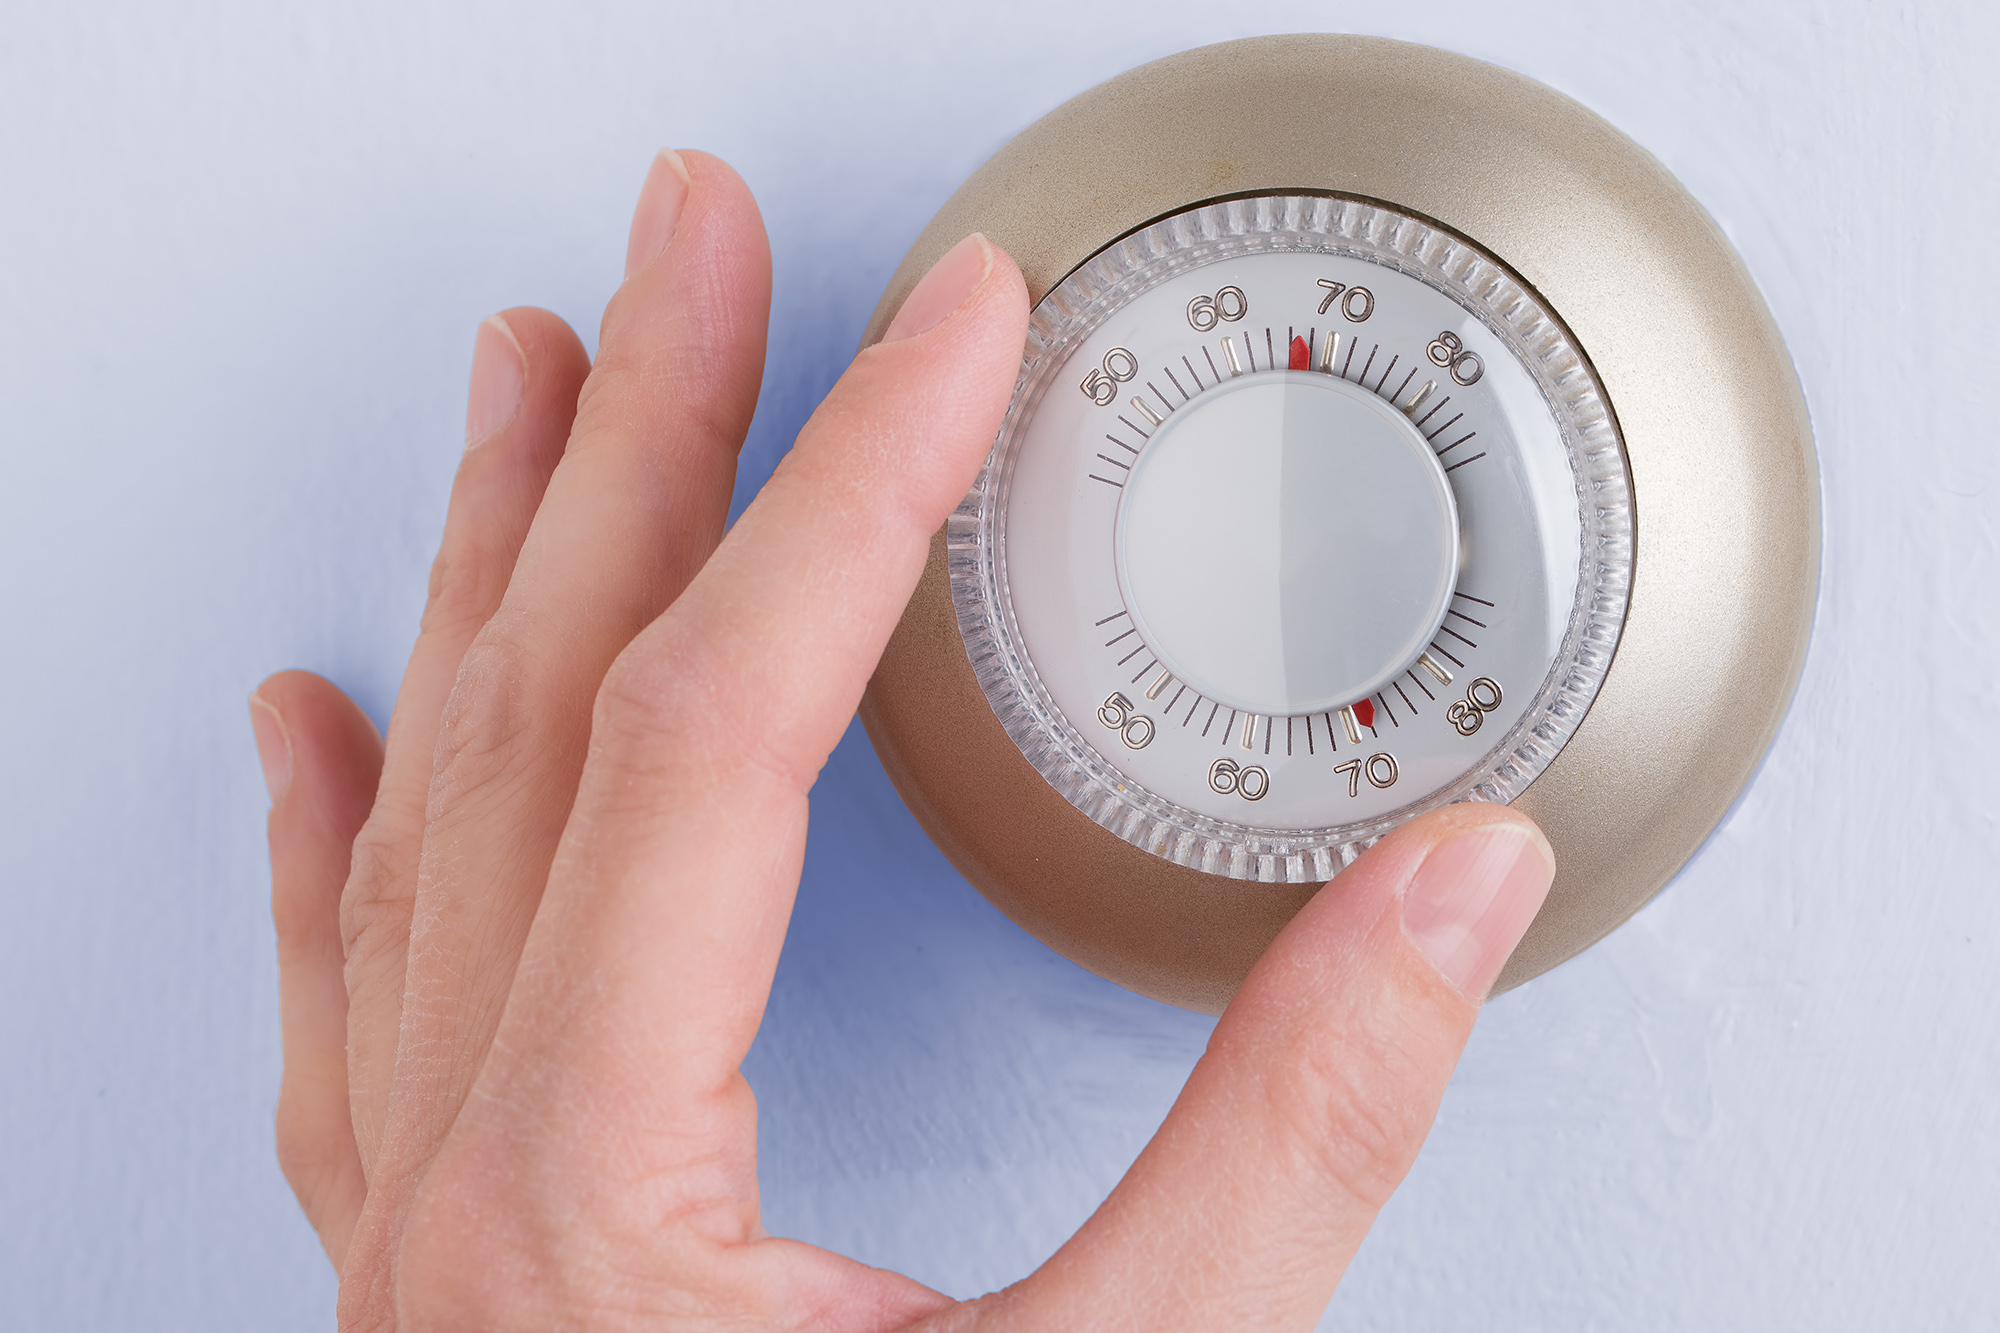 Room Thermostat Where Should It Go In Your Home?